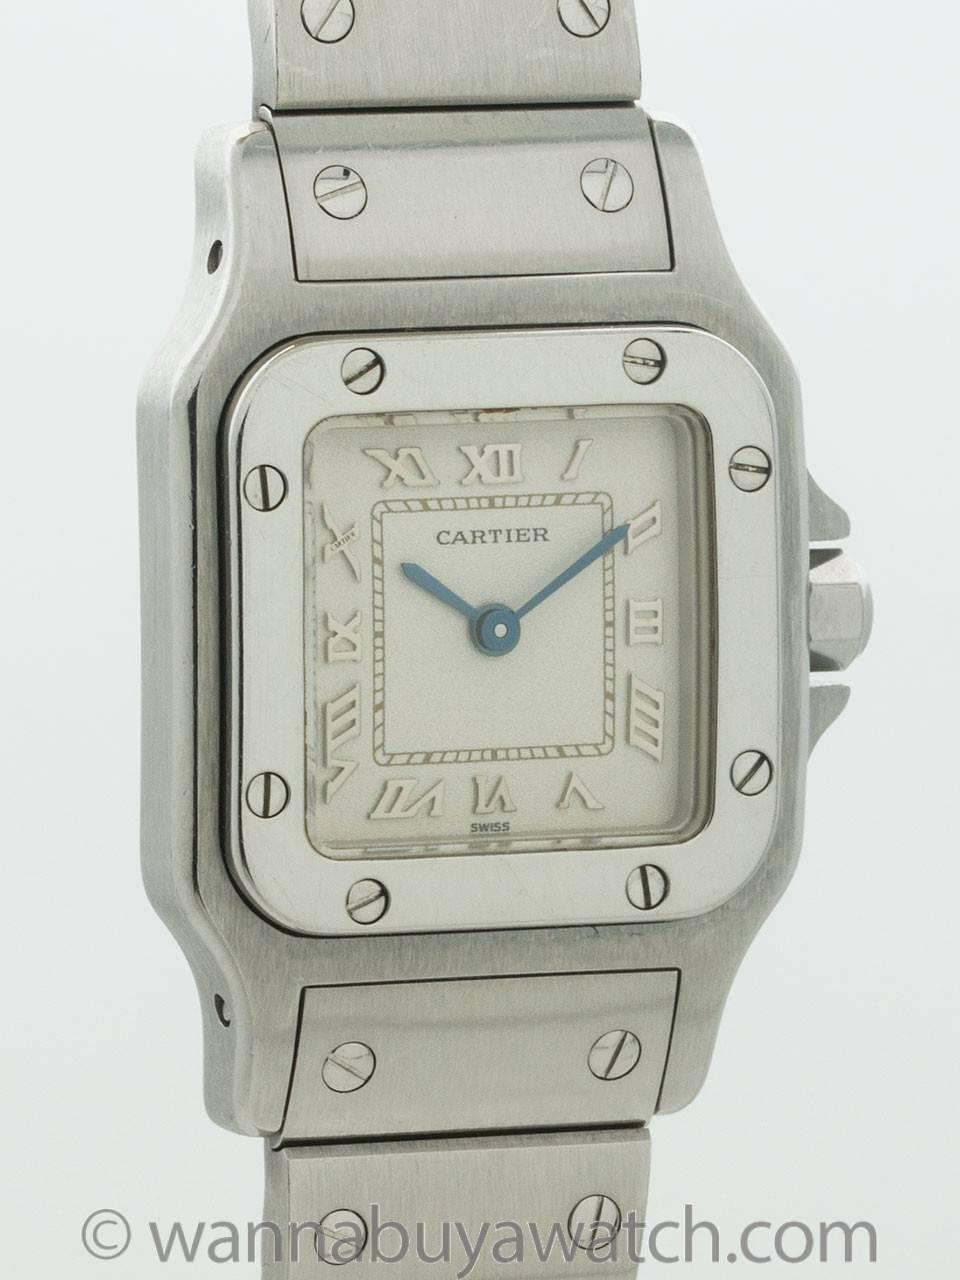 Cartier Stainless Steel Lady’s Santos ref 1565 circa 2000s. Square case measuring 24 x 35mm with rounded corners, screwed down bezel and cabochon sapphire crown. Classic Cartier white dial with applied Roman numerals and blue steeled hands. With